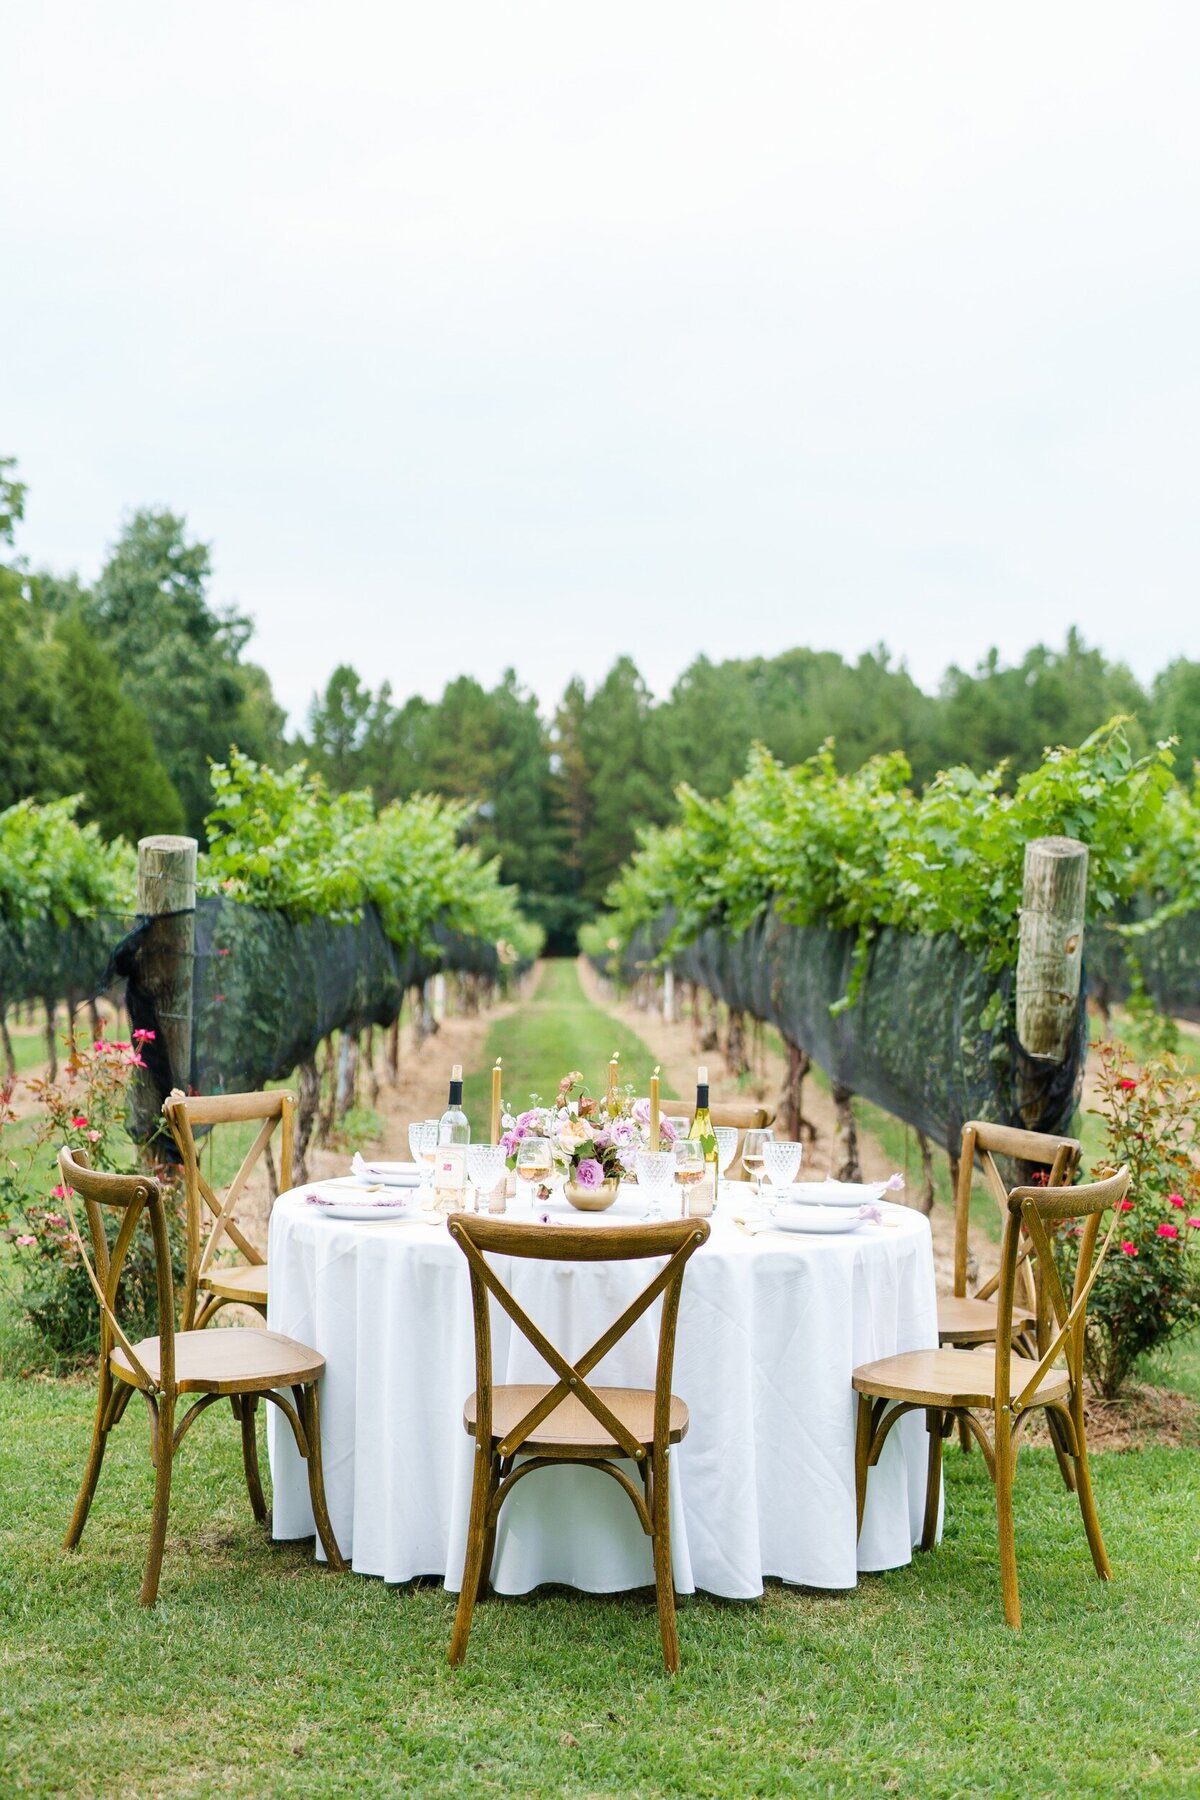 An elegantly decorated tablescape in front of a row of vineyards at a wedding venue near Charlotte, NC.